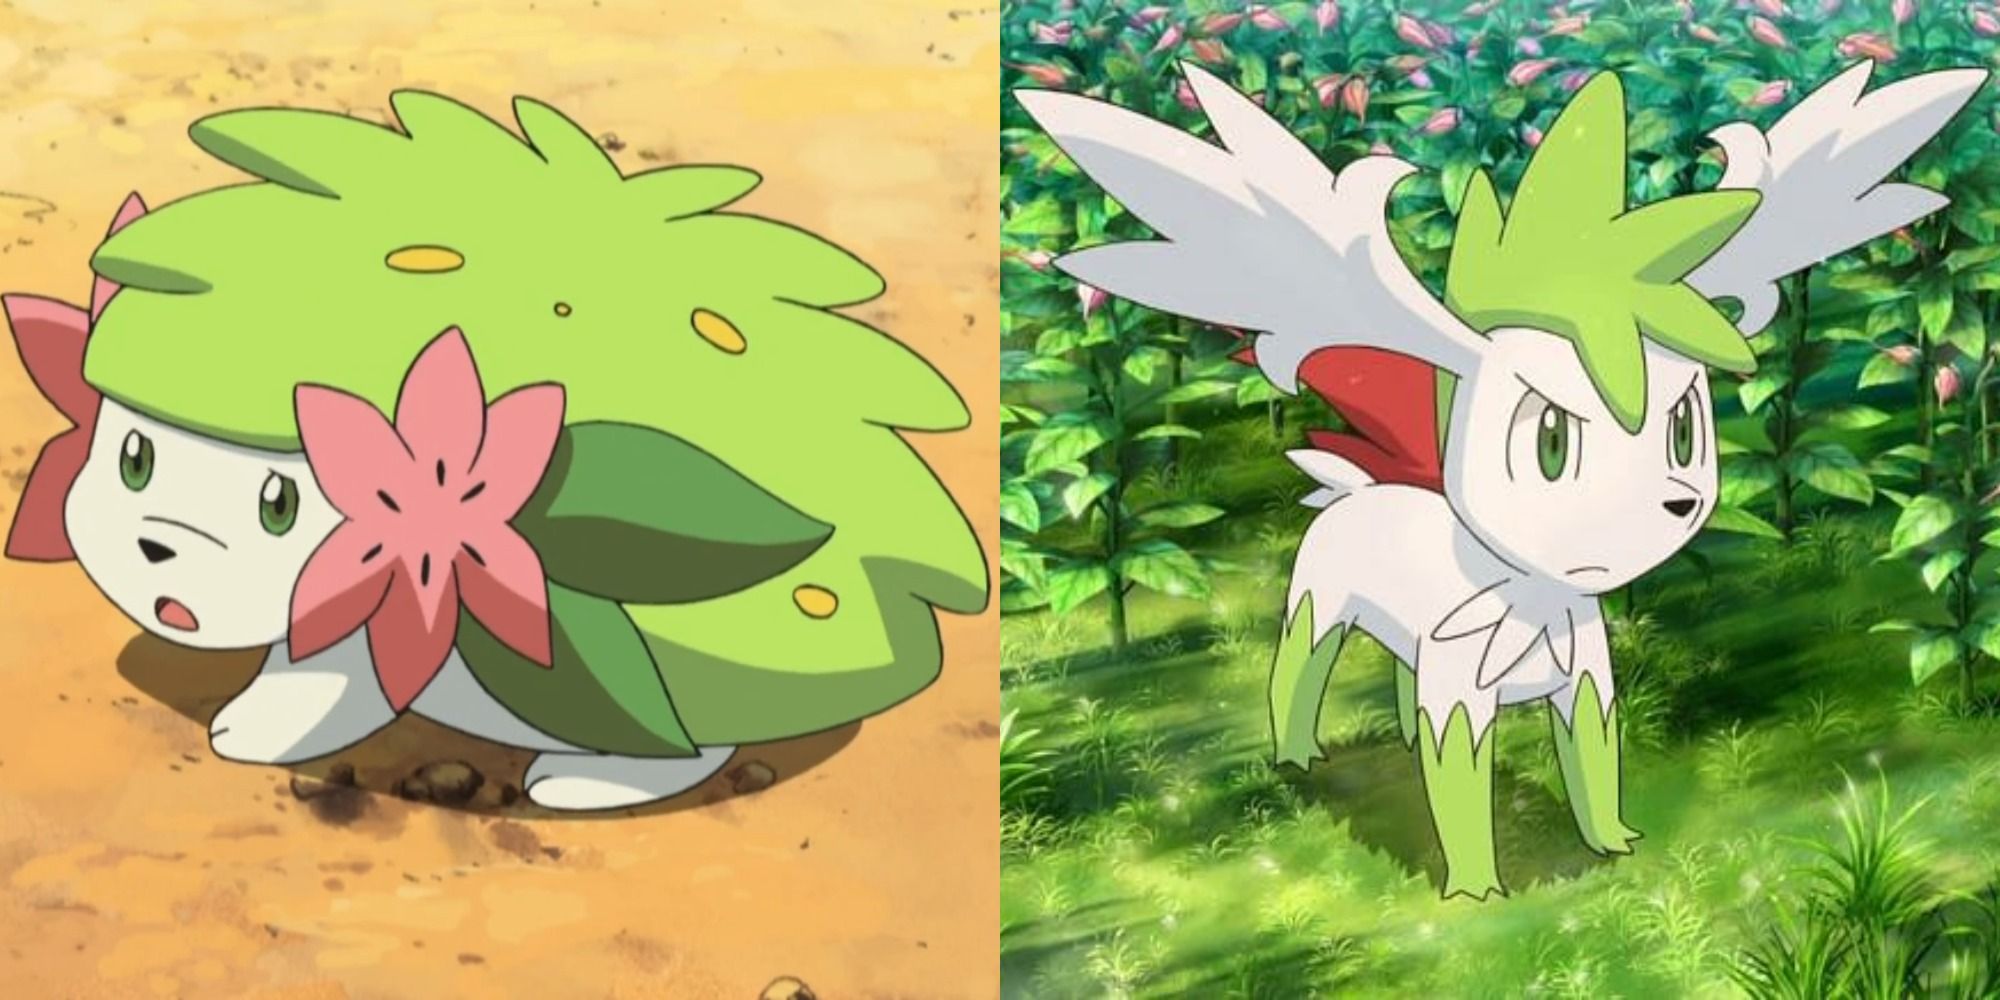 Split image showing Shaymin's Land and Sky forms in the Pokémon anime.